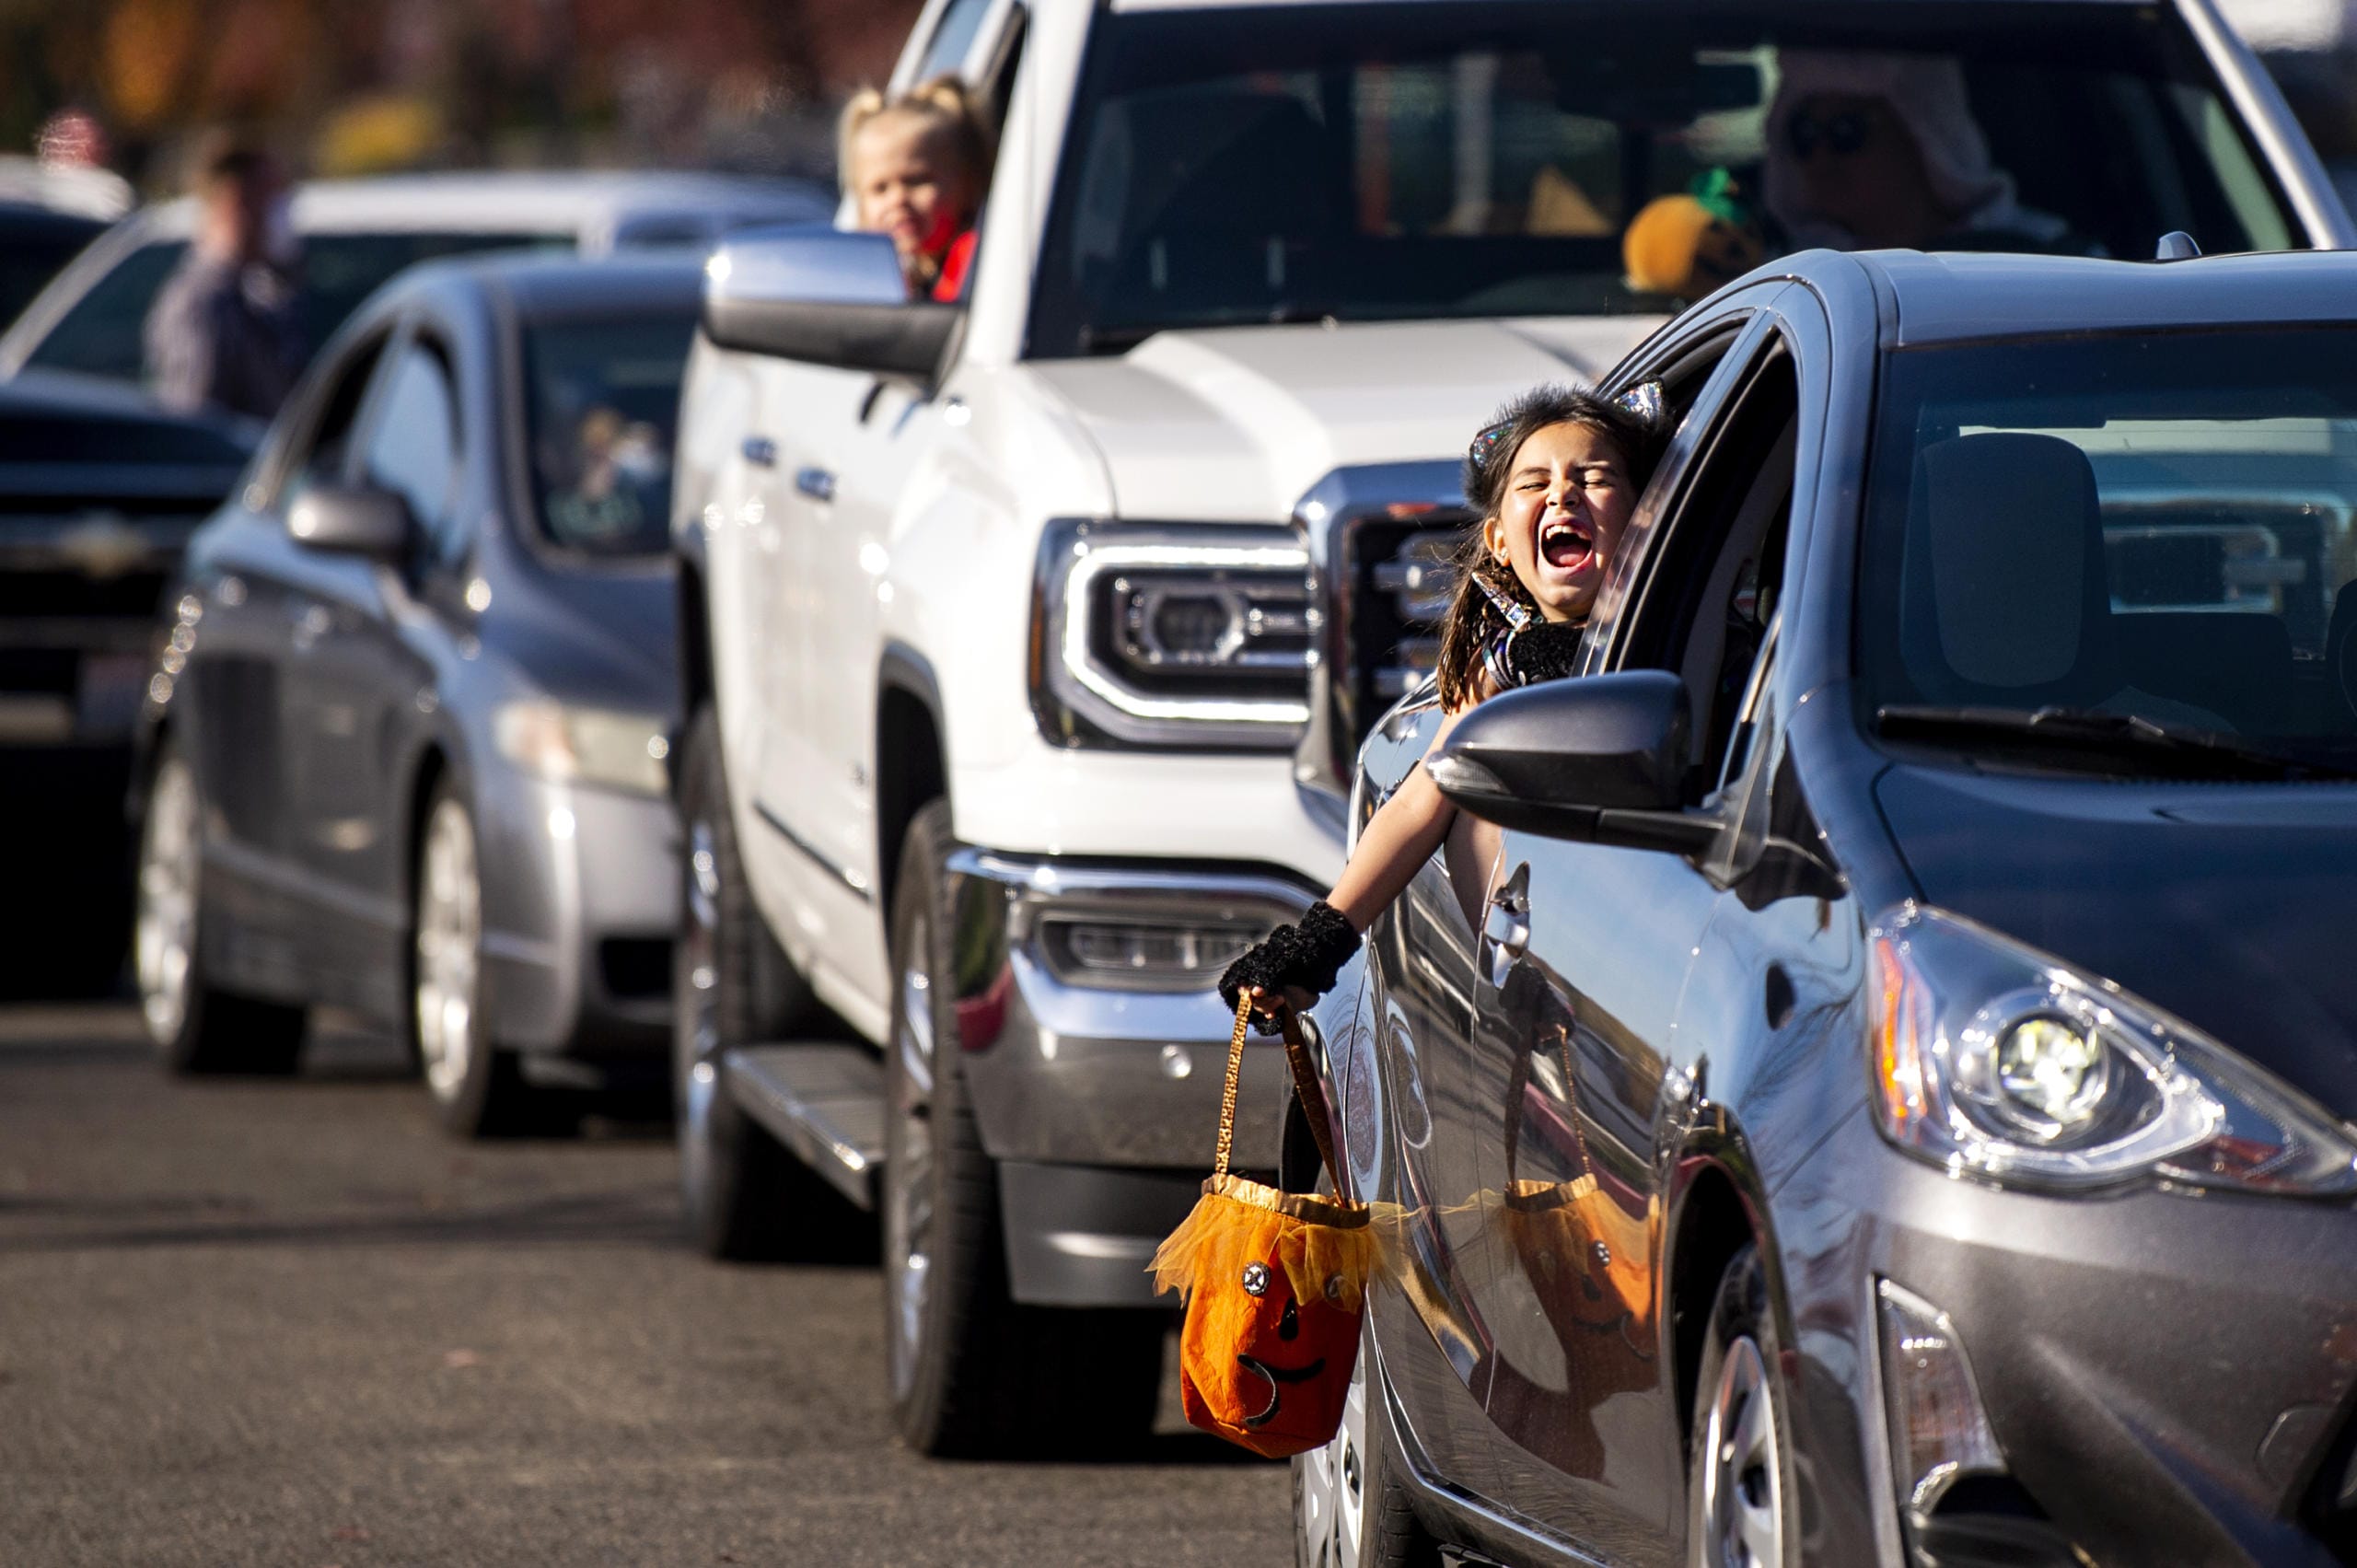 Abigail Pine, 7, screams in excitement as she sees costumed characters and goodie bags ahead of her during the fourth annual Booville, a drive-thru Halloween event put on by the Parks Foundation of Clark County at Vancouver Mall on Saturday. Abigail dressed as a kitten.